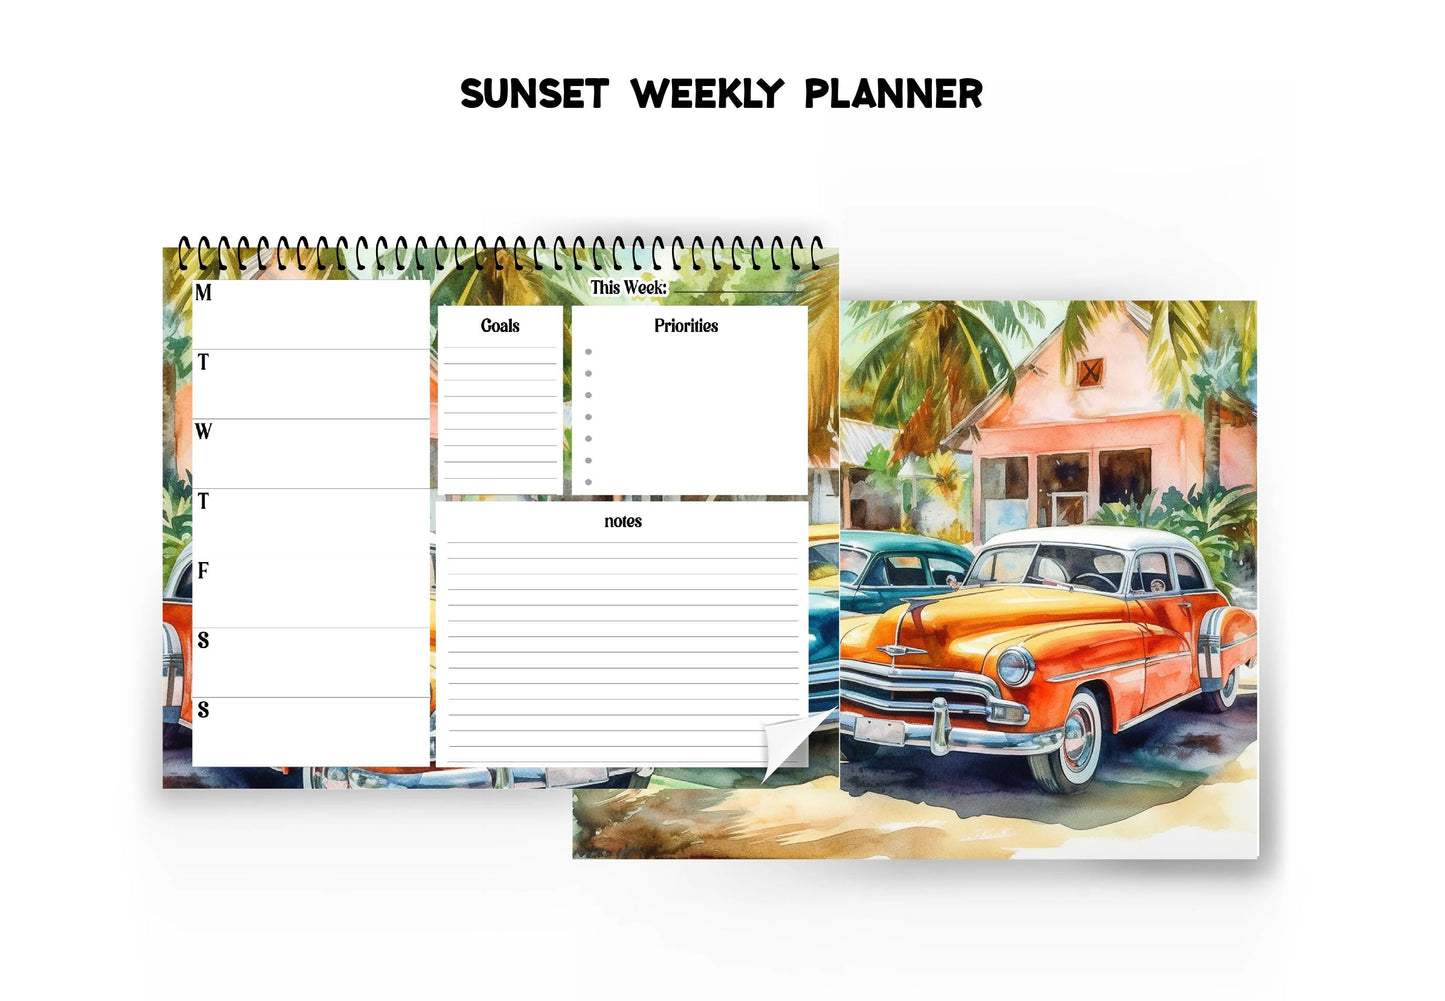 Sunset Weekly Planner